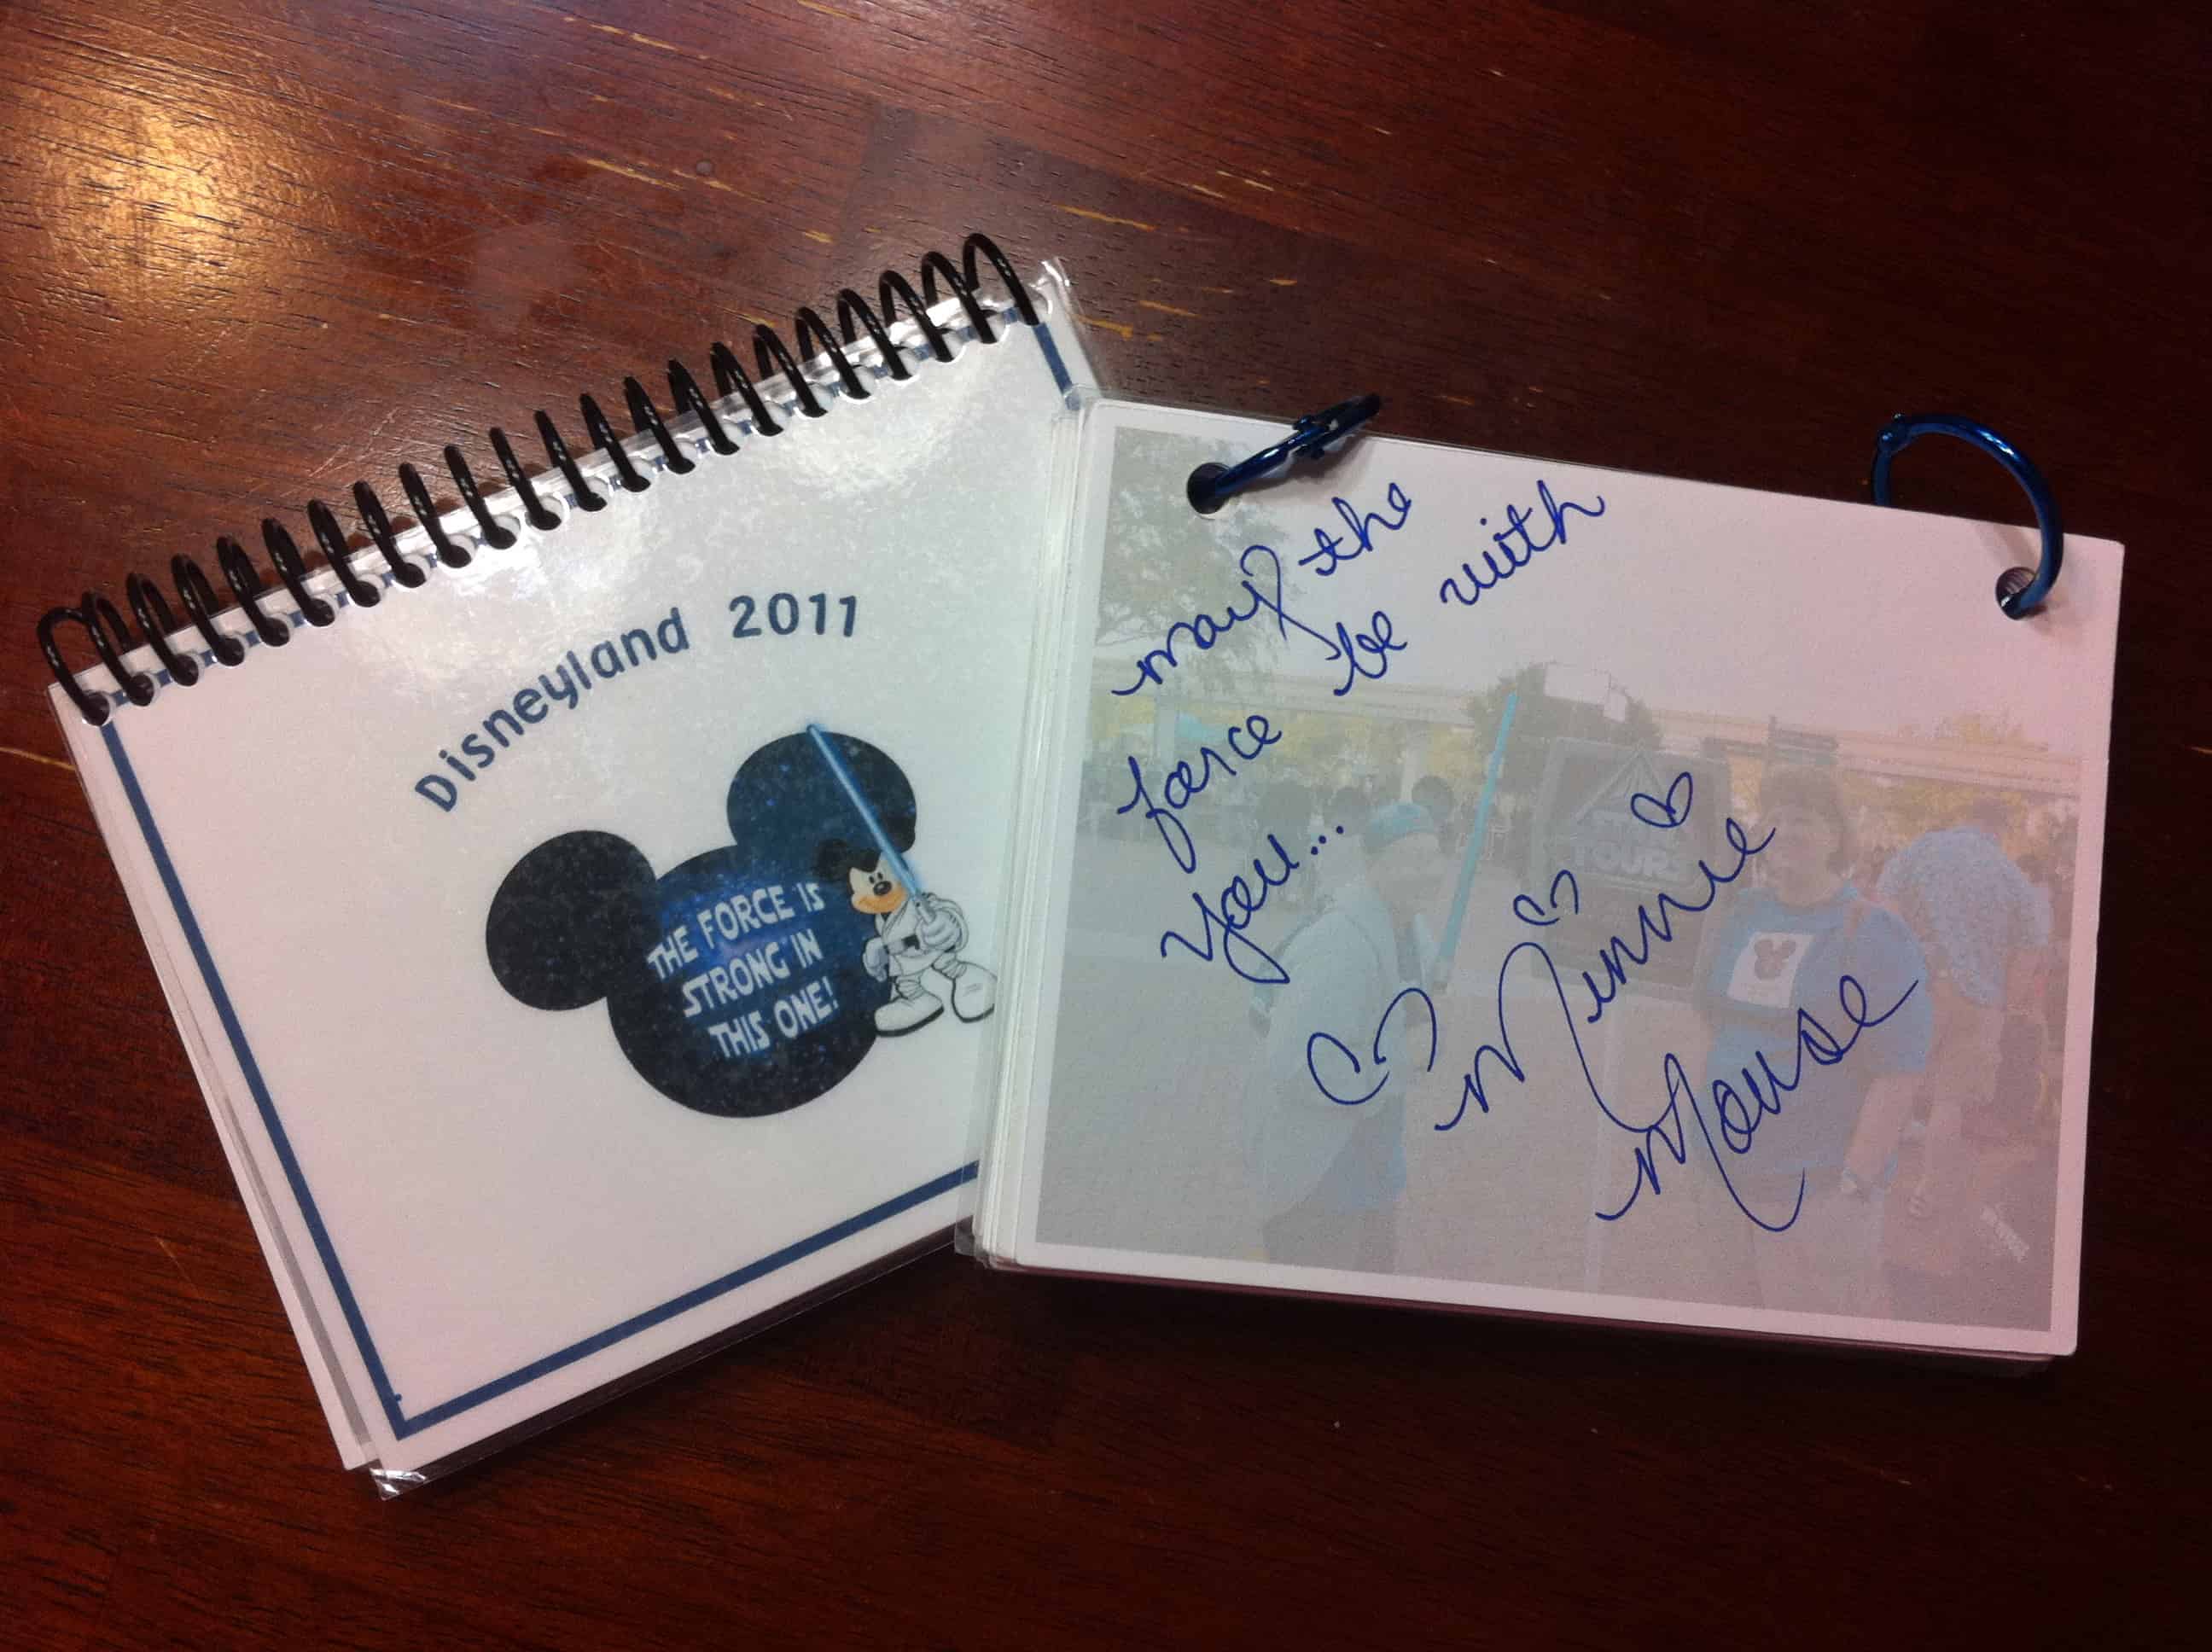 Autograph Books for Walt Disney World - This Roller Coaster Called